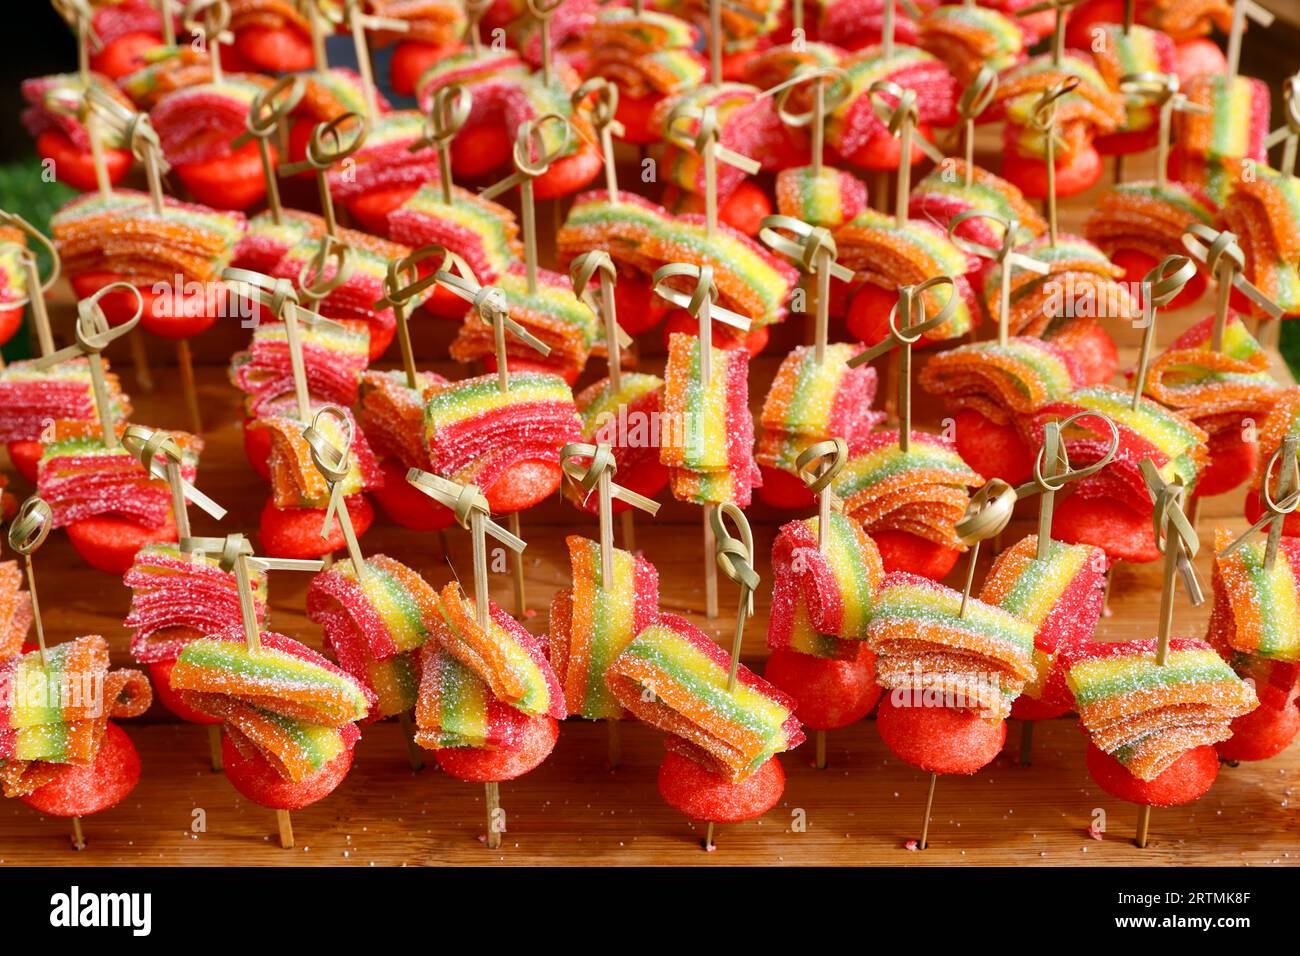 Haribo fruit flavour gums candies with a sour sugar.  France. Stock Photo